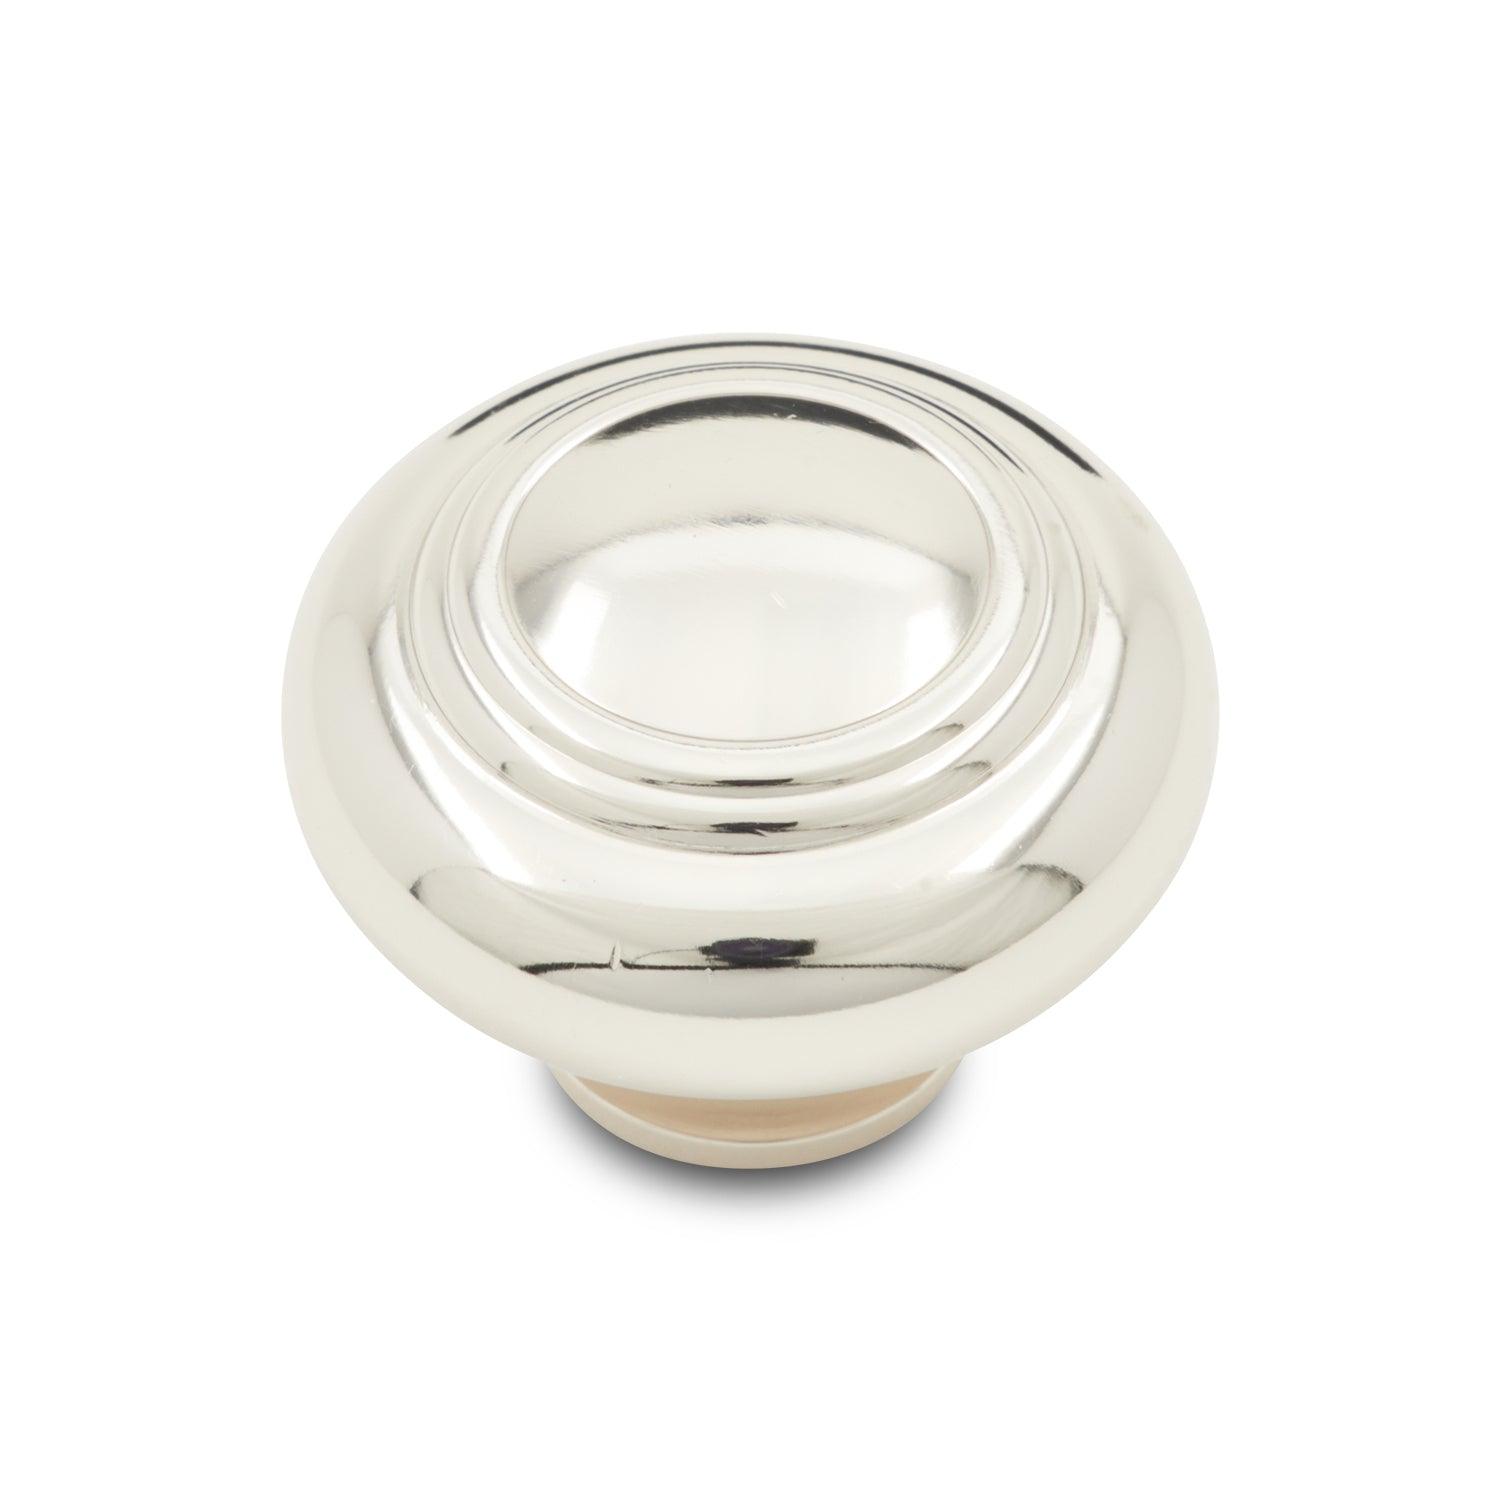 RKI - Decorative Ends Collection - Double Ringed Cabinet Knob